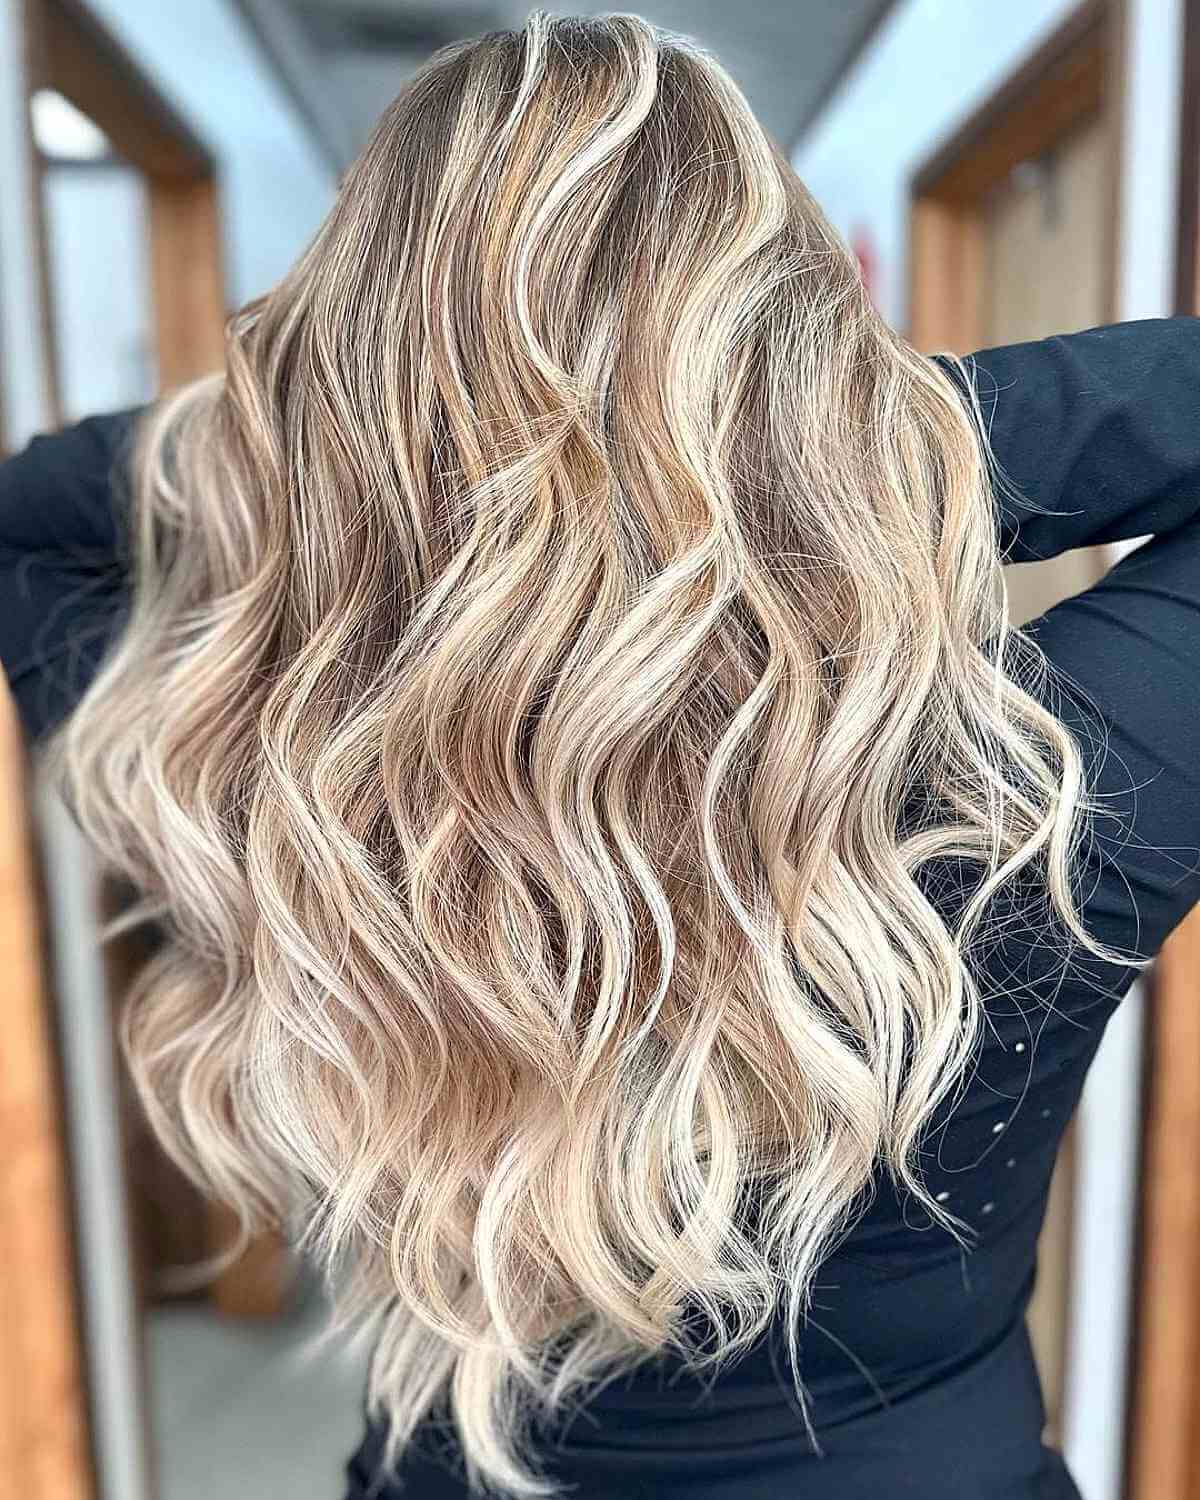 25 Stunning Blonde Hair Color Ideas Beautiful For Every Skin Tone - 199